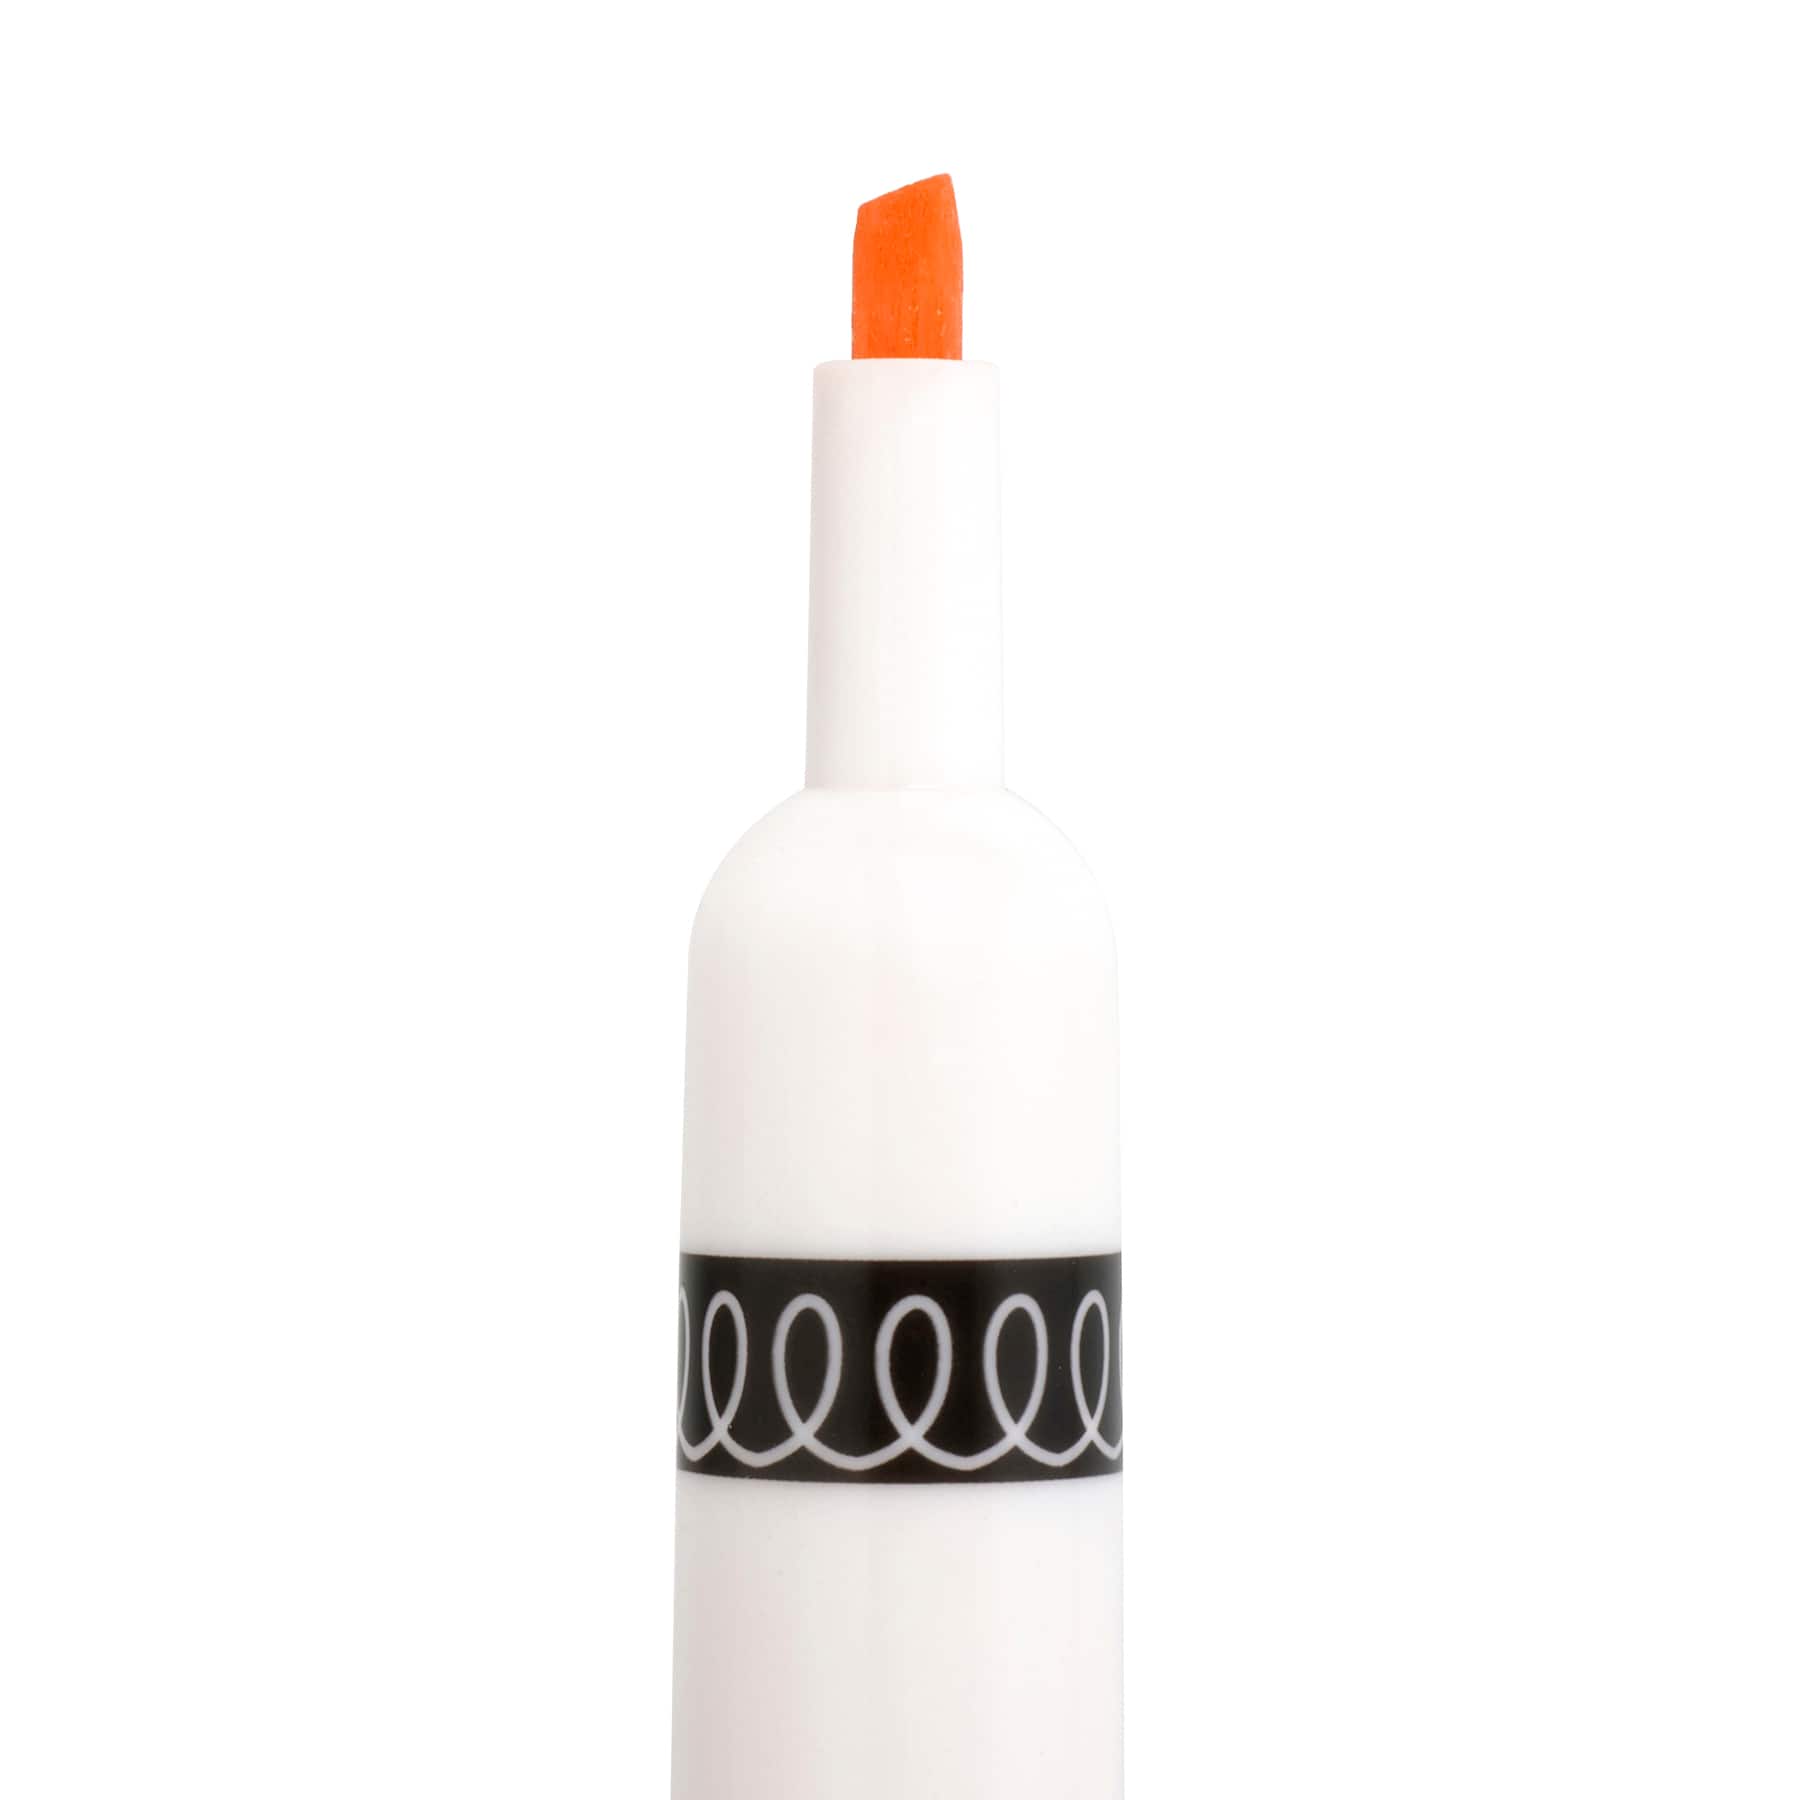 Chisel Tip Scented Washable Markers by Creatology&#x2122;